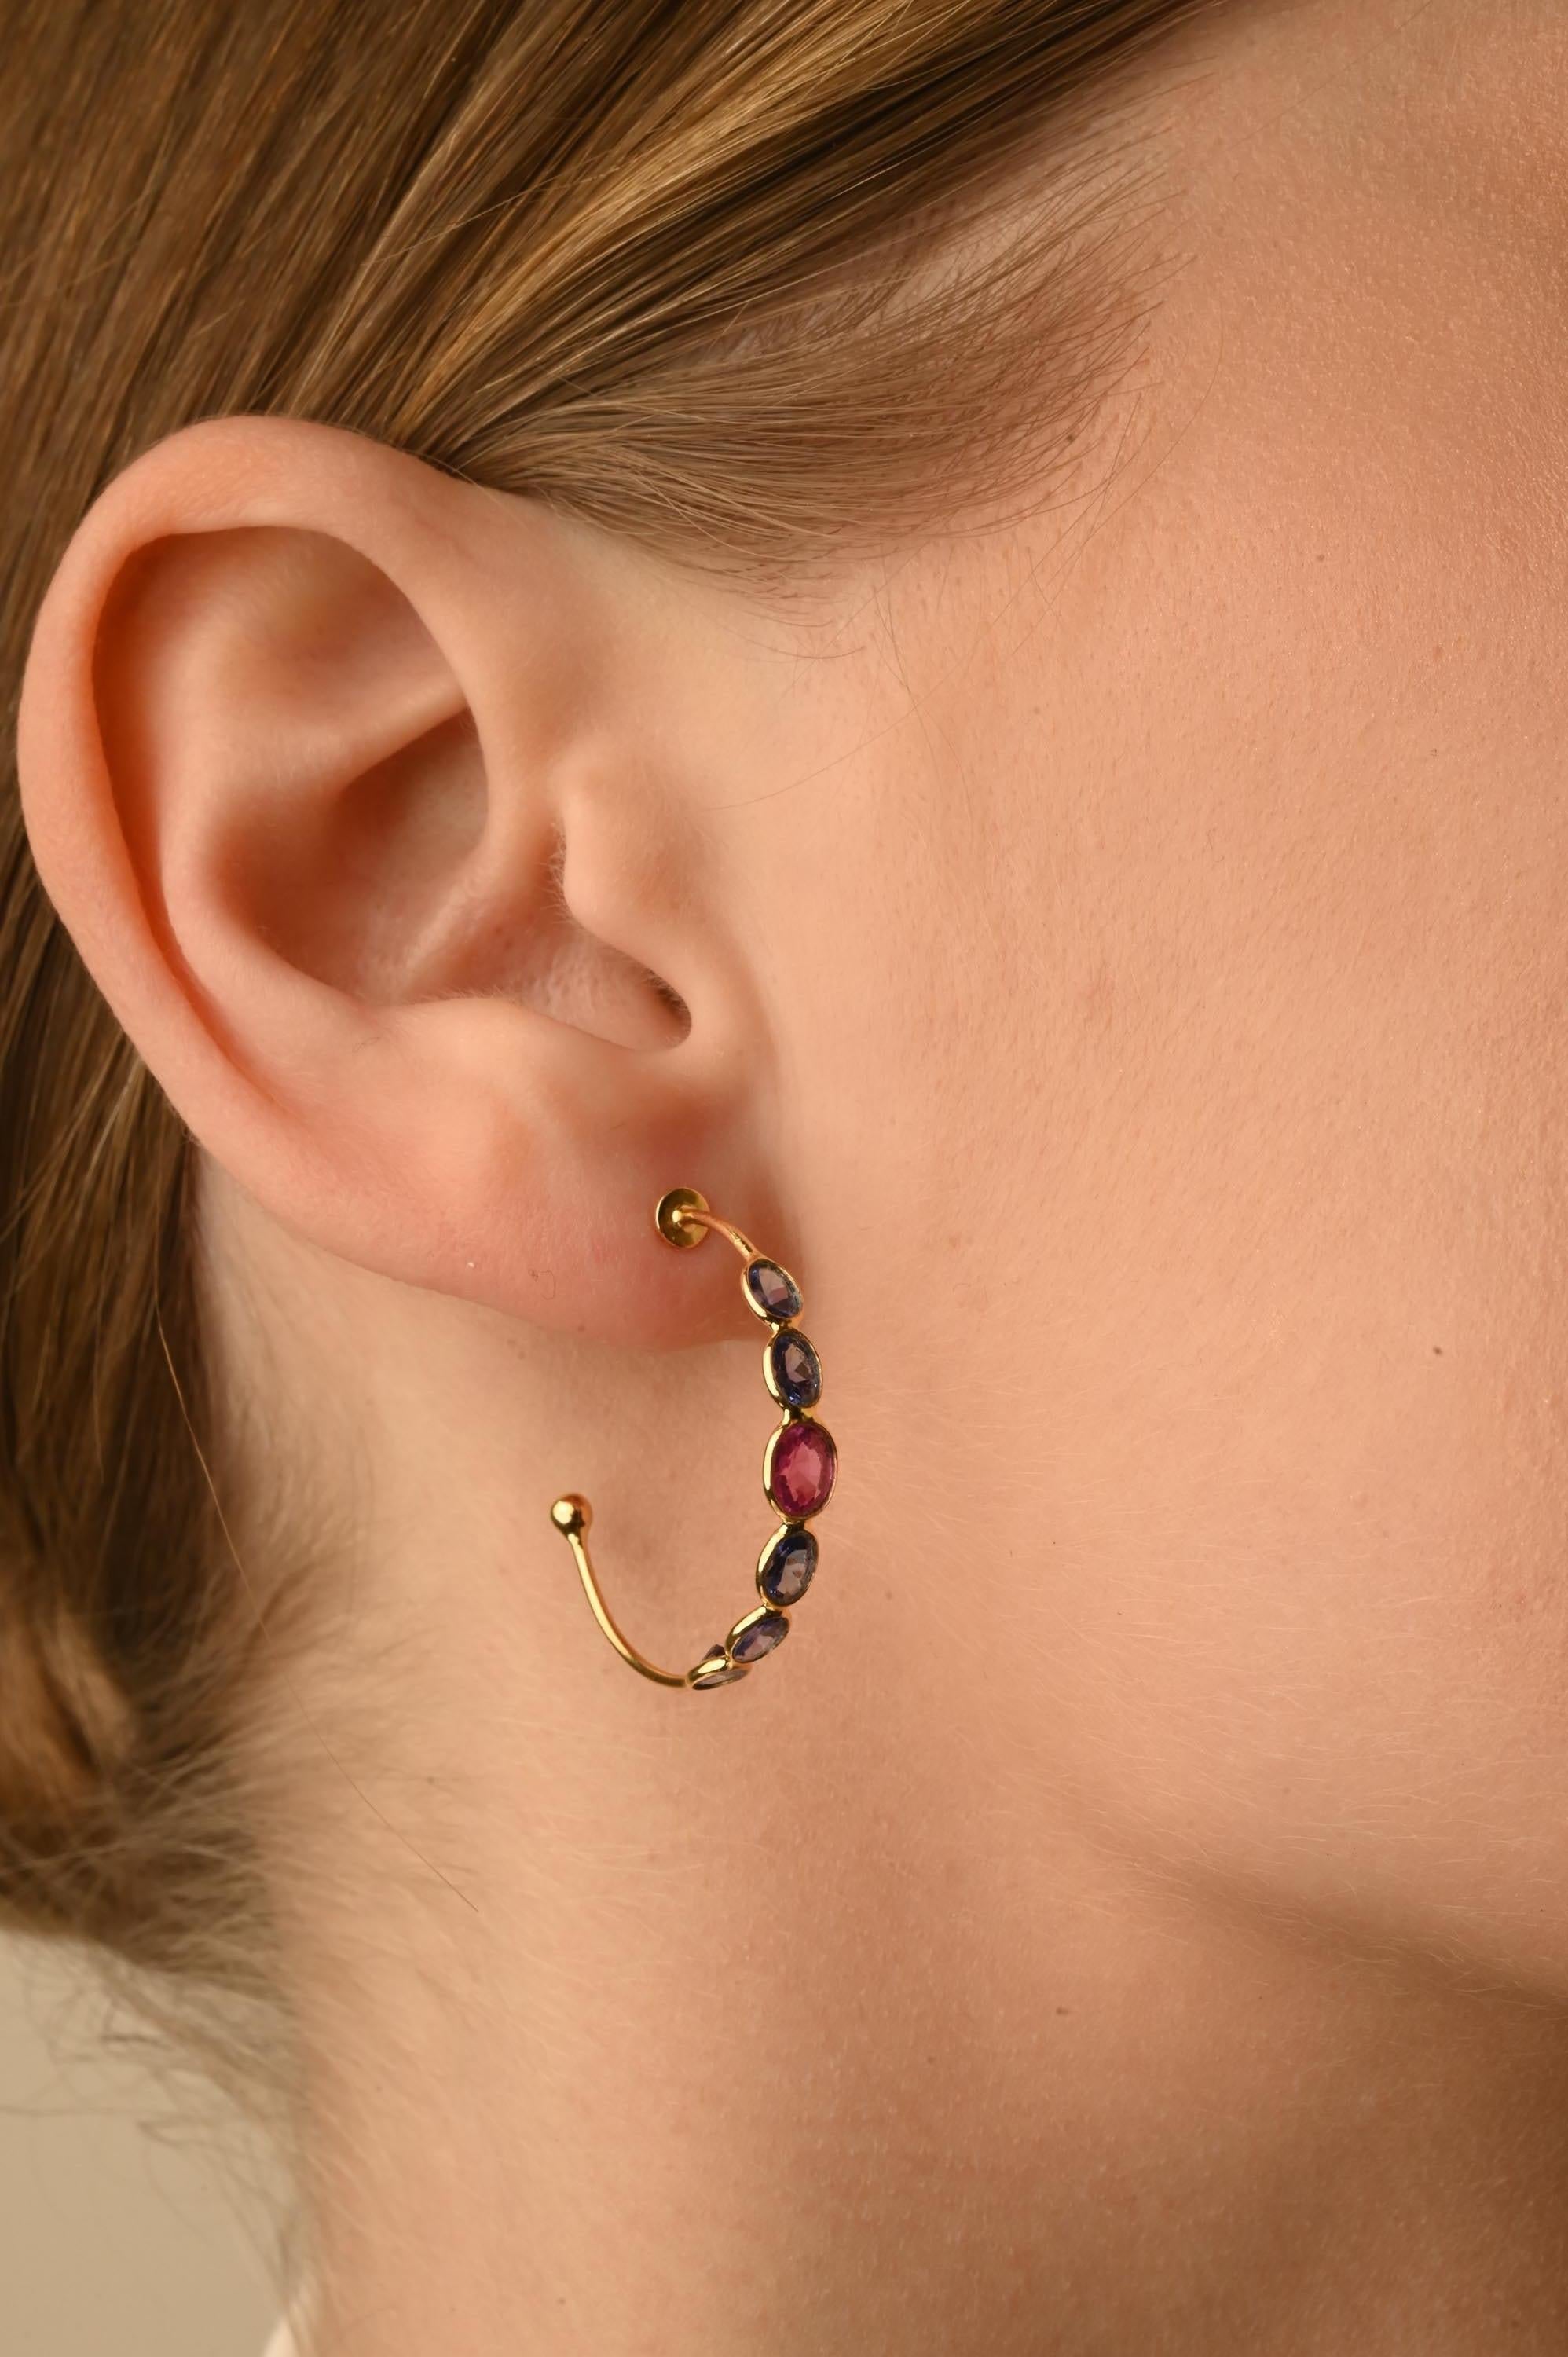 14k Solid Yellow Gold Mounted Multi Sapphire Hoop Earrings Gift for Her For Sale 5